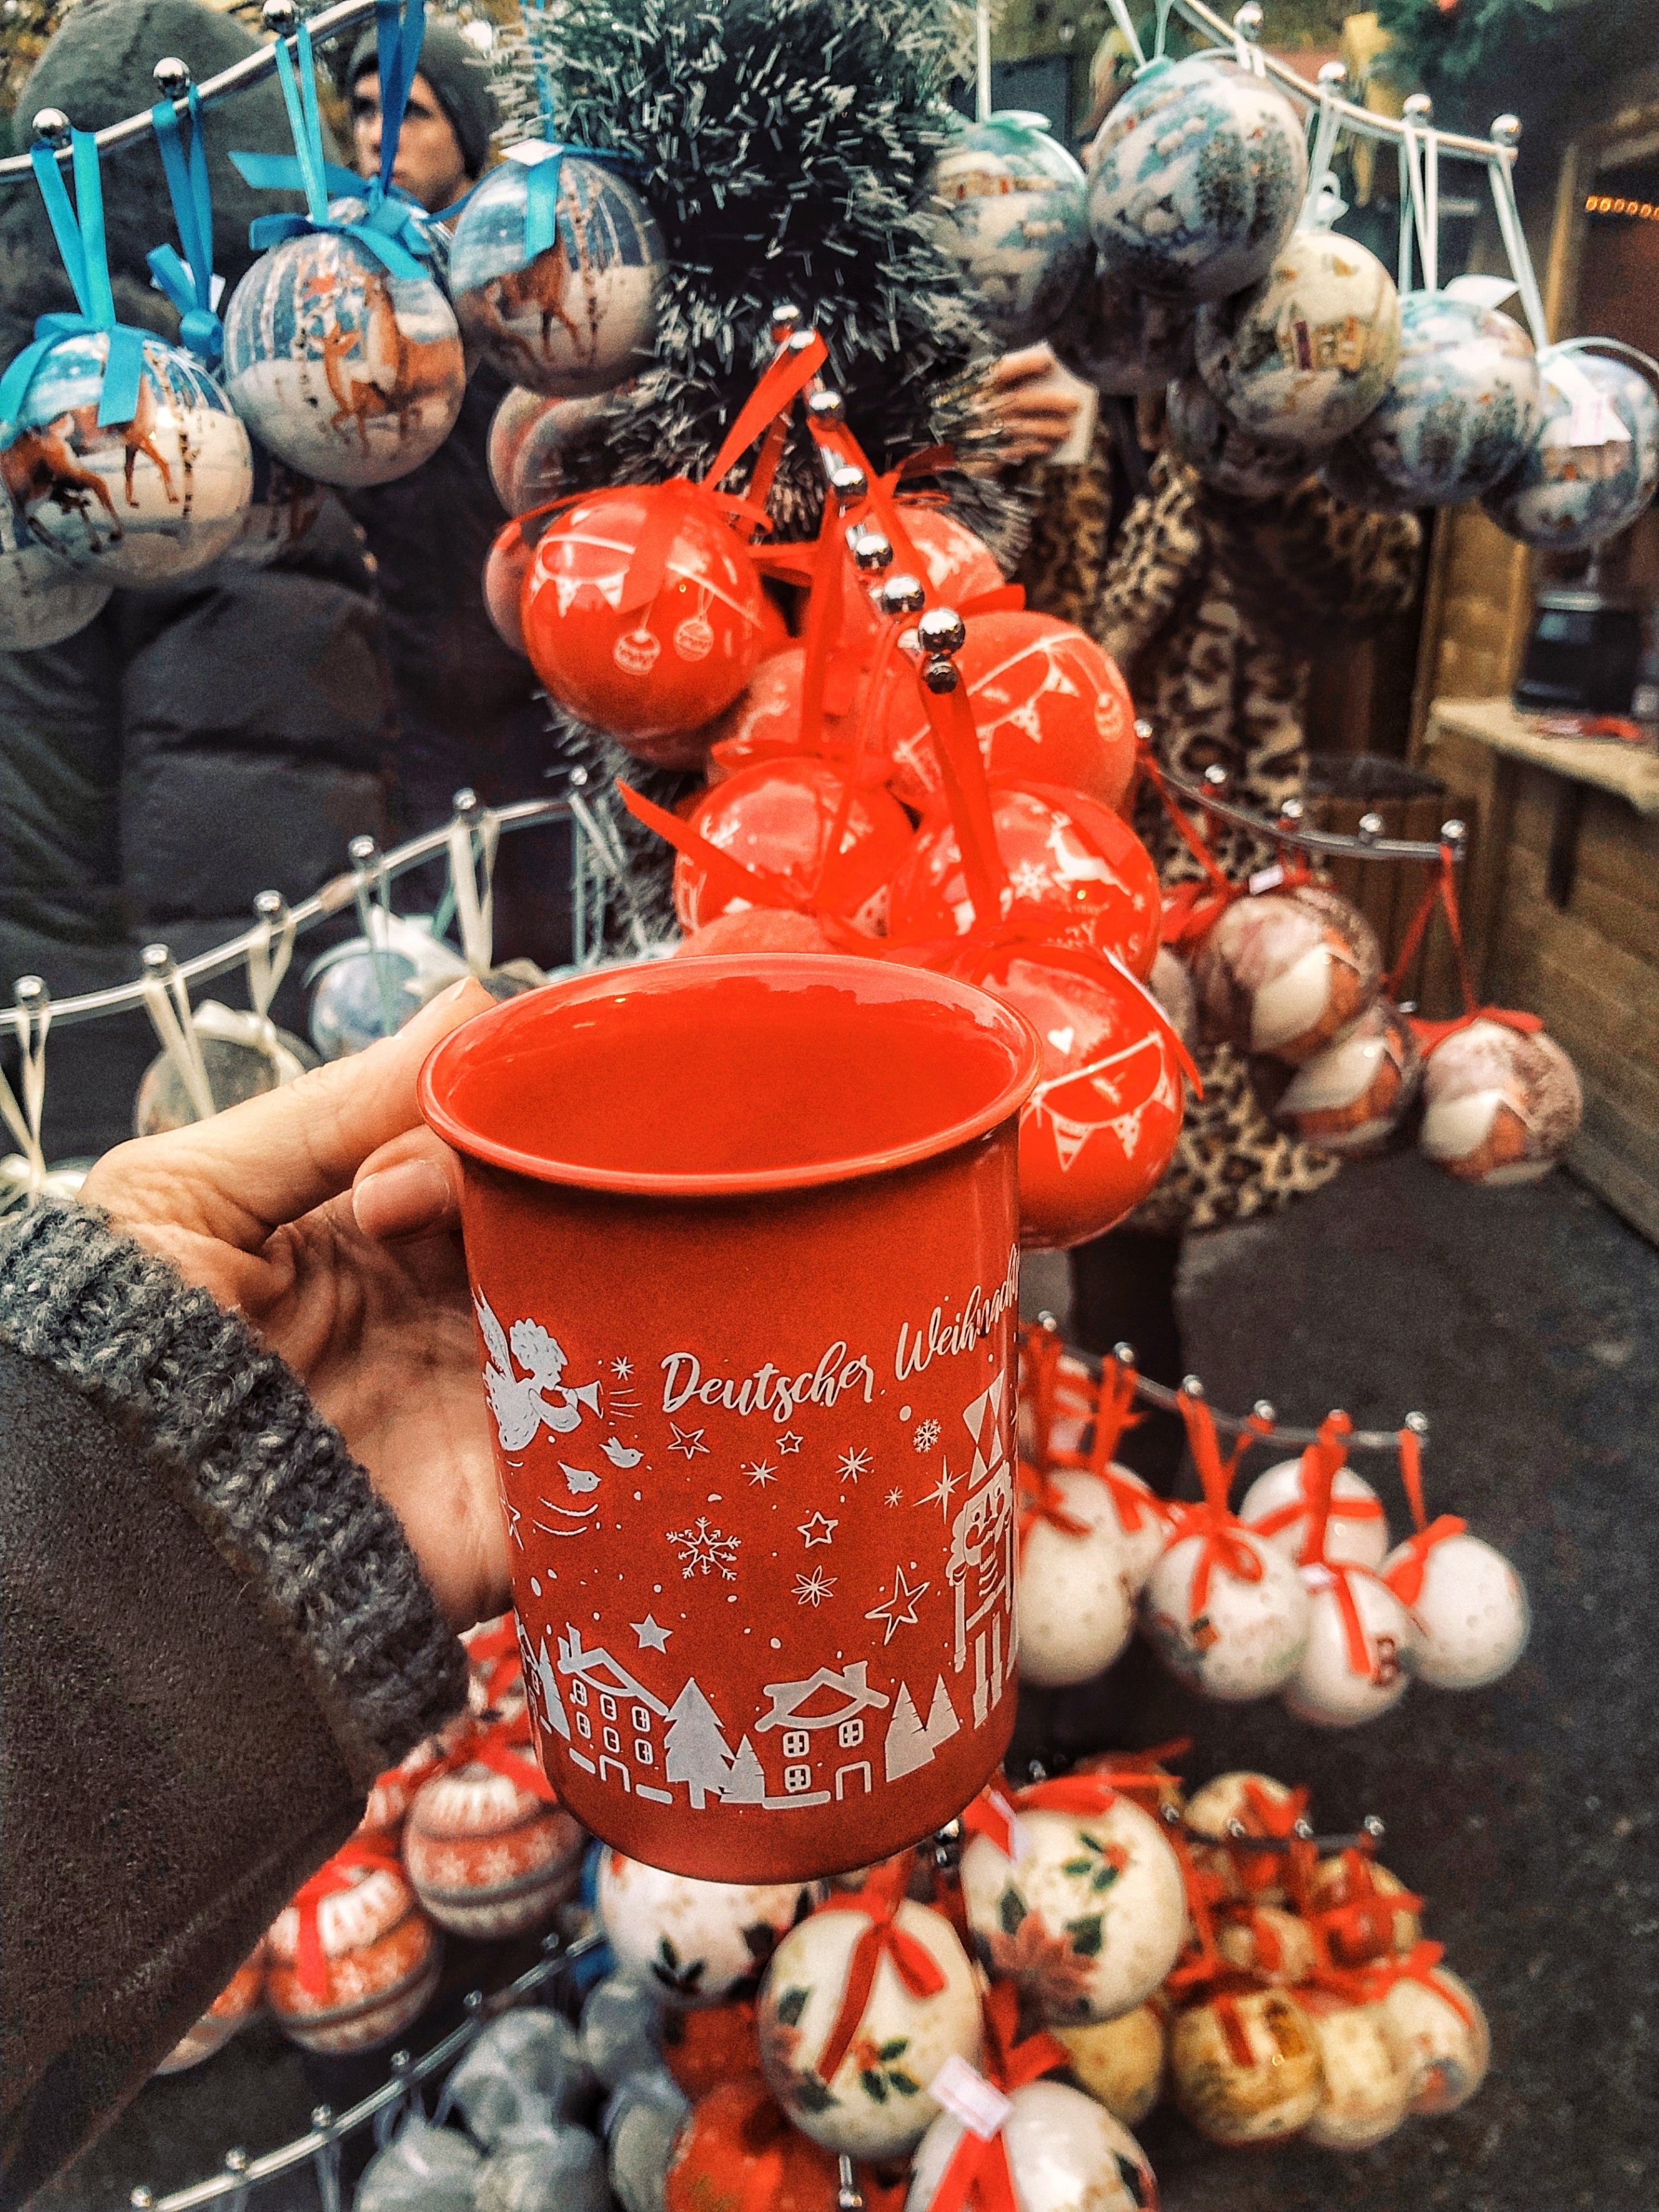 Caption: A photo of a Viennese red mug with Christmas decorations behind it at the Christmas Market, Sofia, Bulgaria.